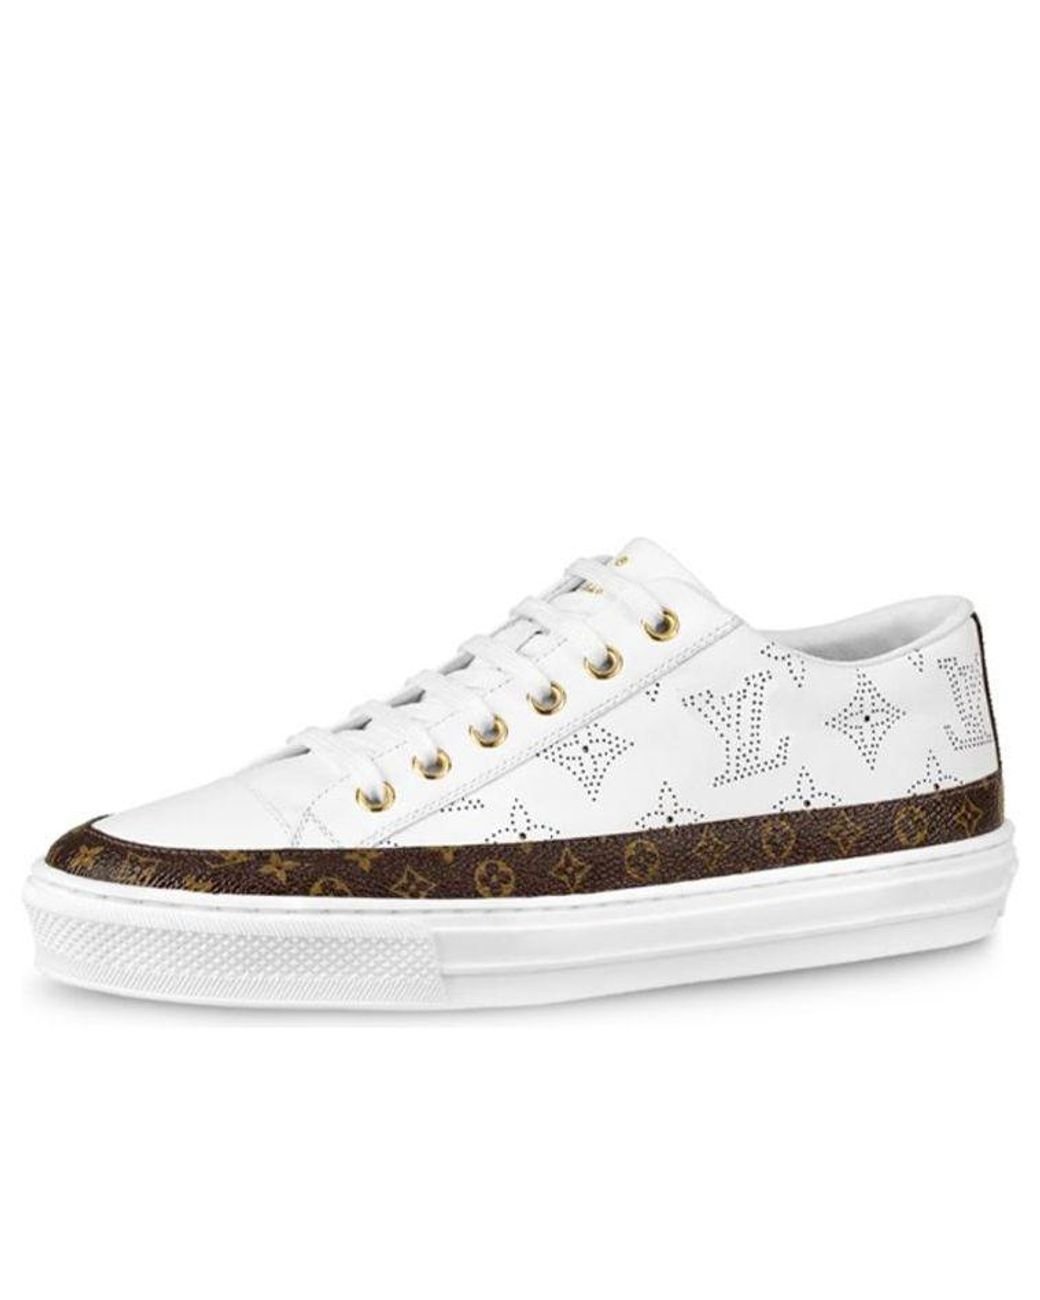 Louis Vuitton Lv Aftergame Sports Shoes White